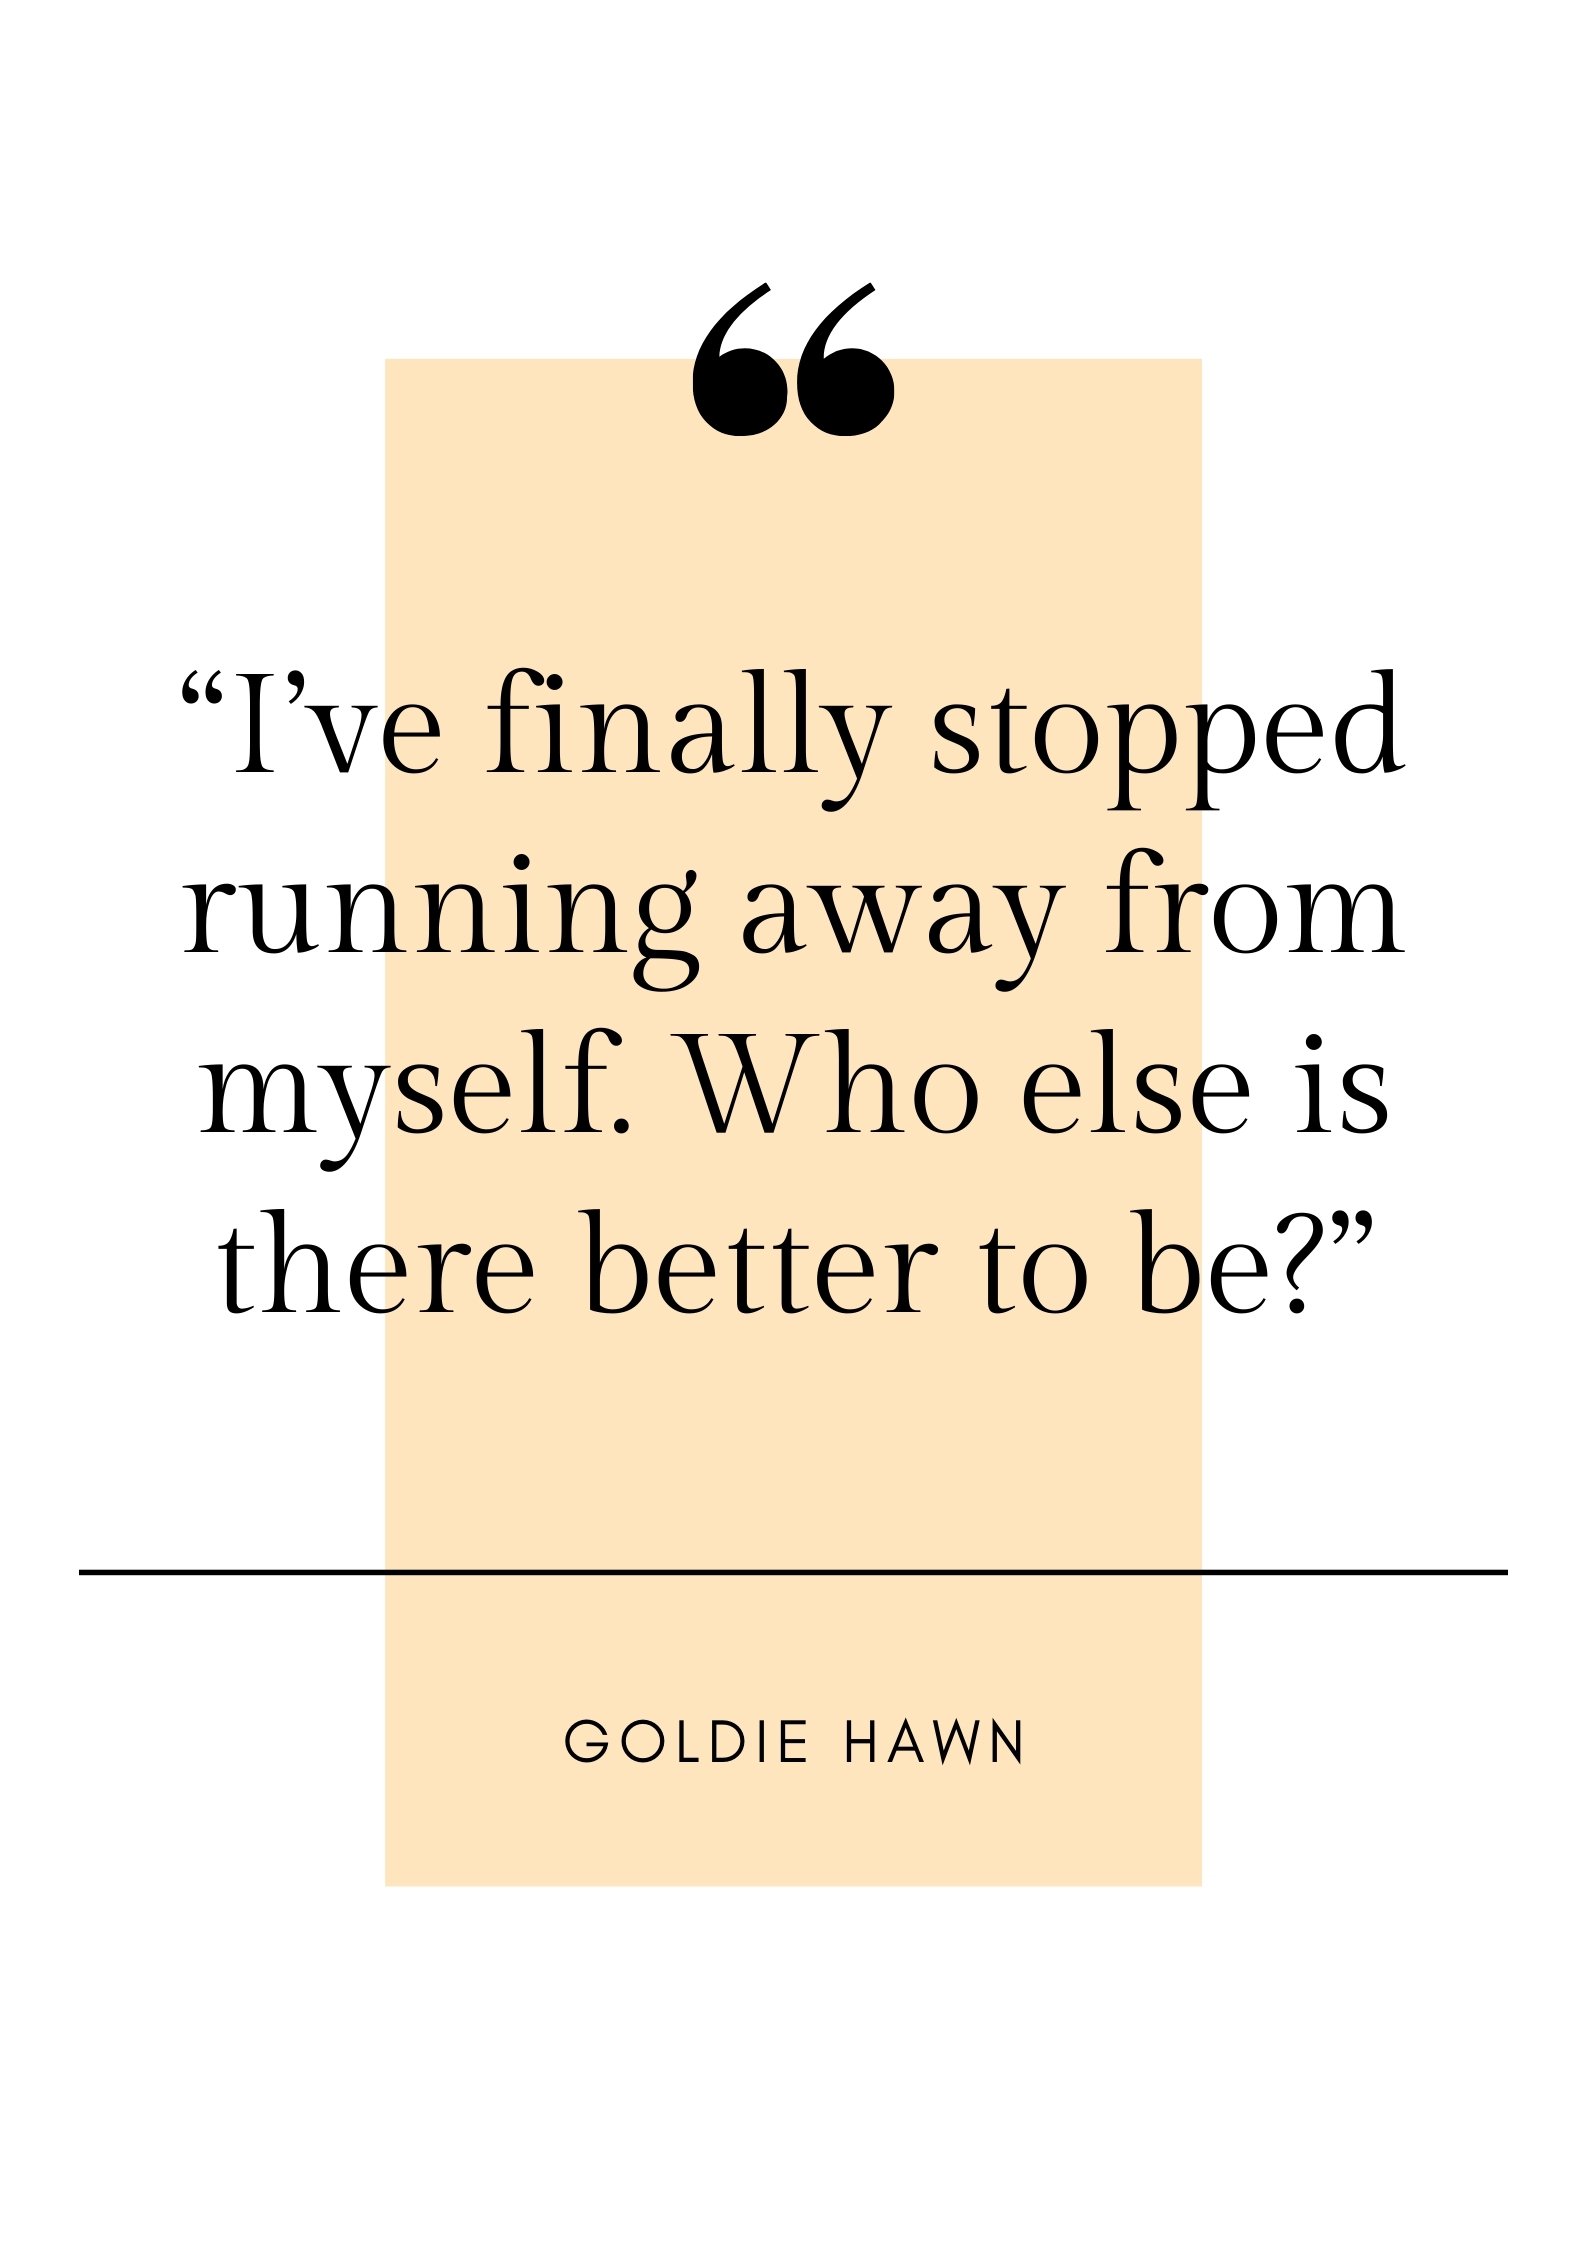 goldie hawn quote